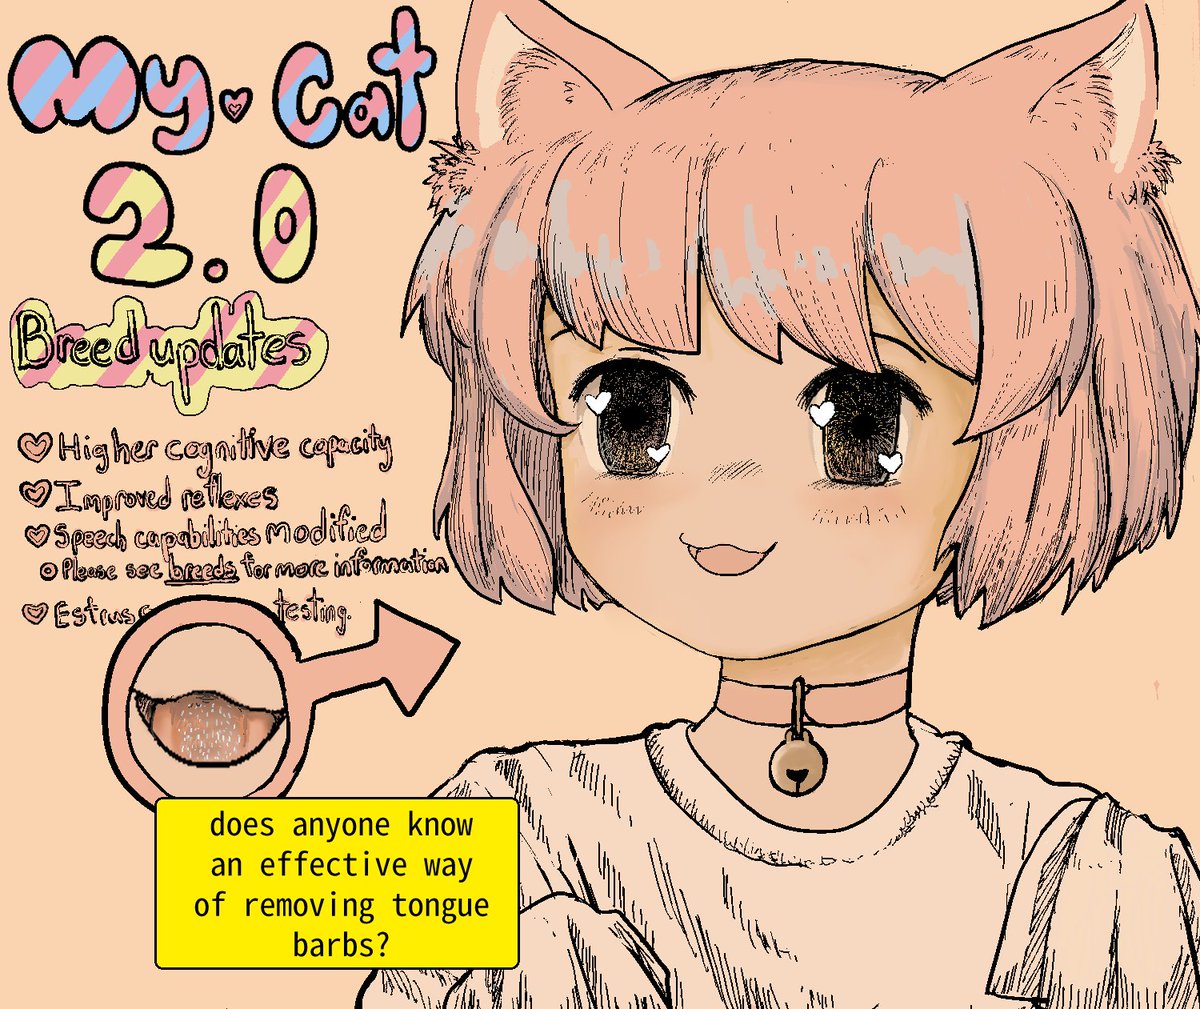 Why genetically modified catgirls for domestic ownership IS A BAD IDEA 